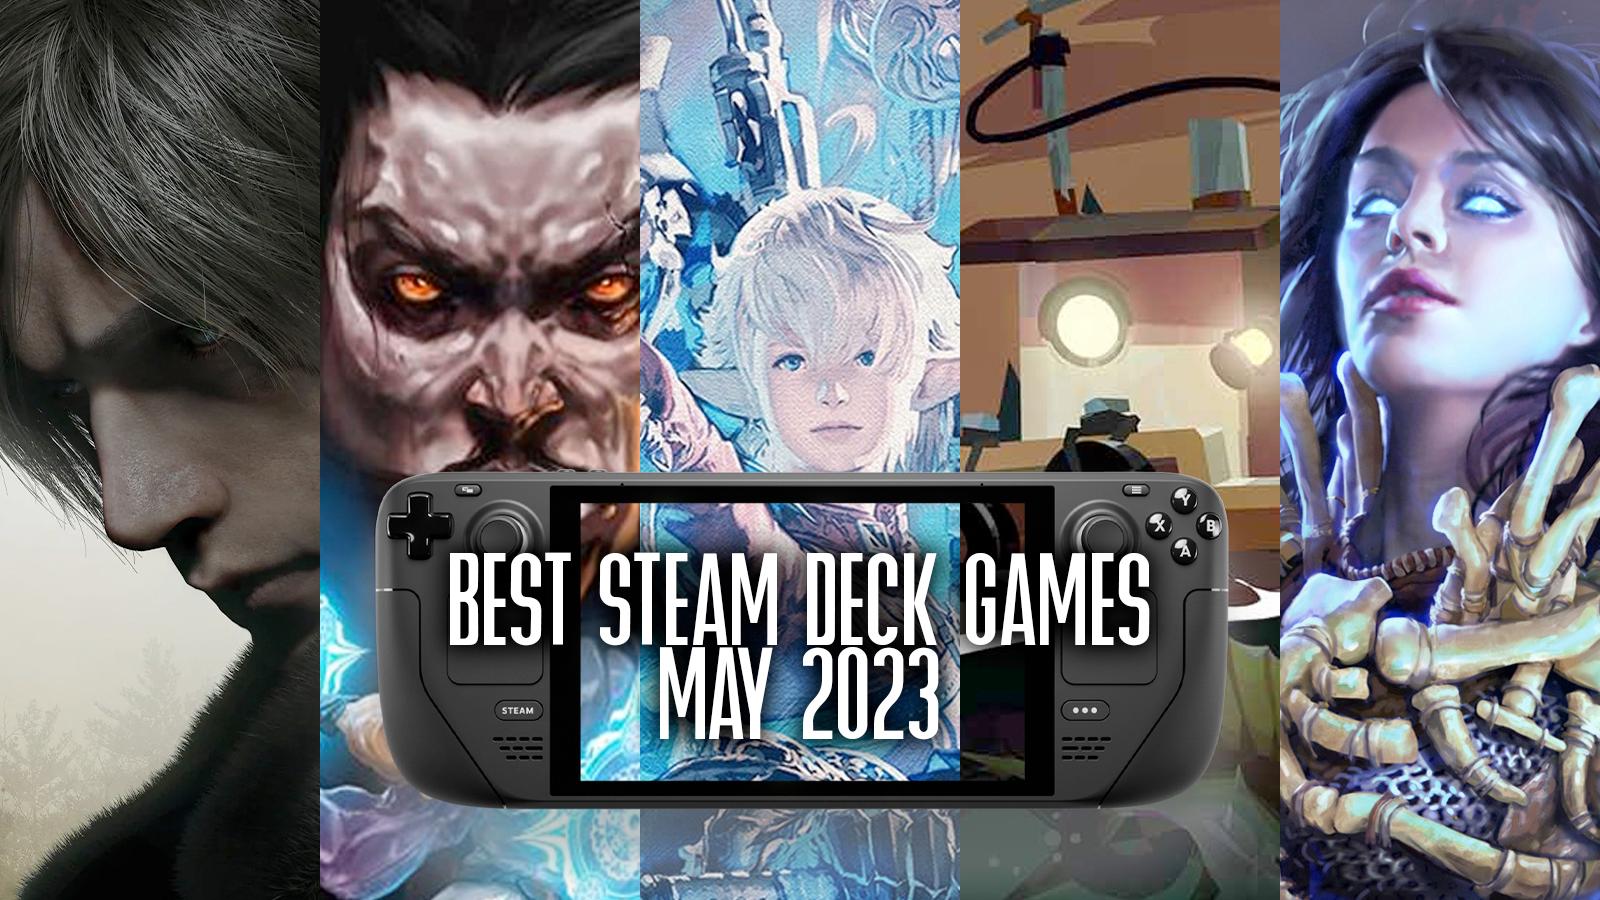 Best Steam Deck games for May 2023